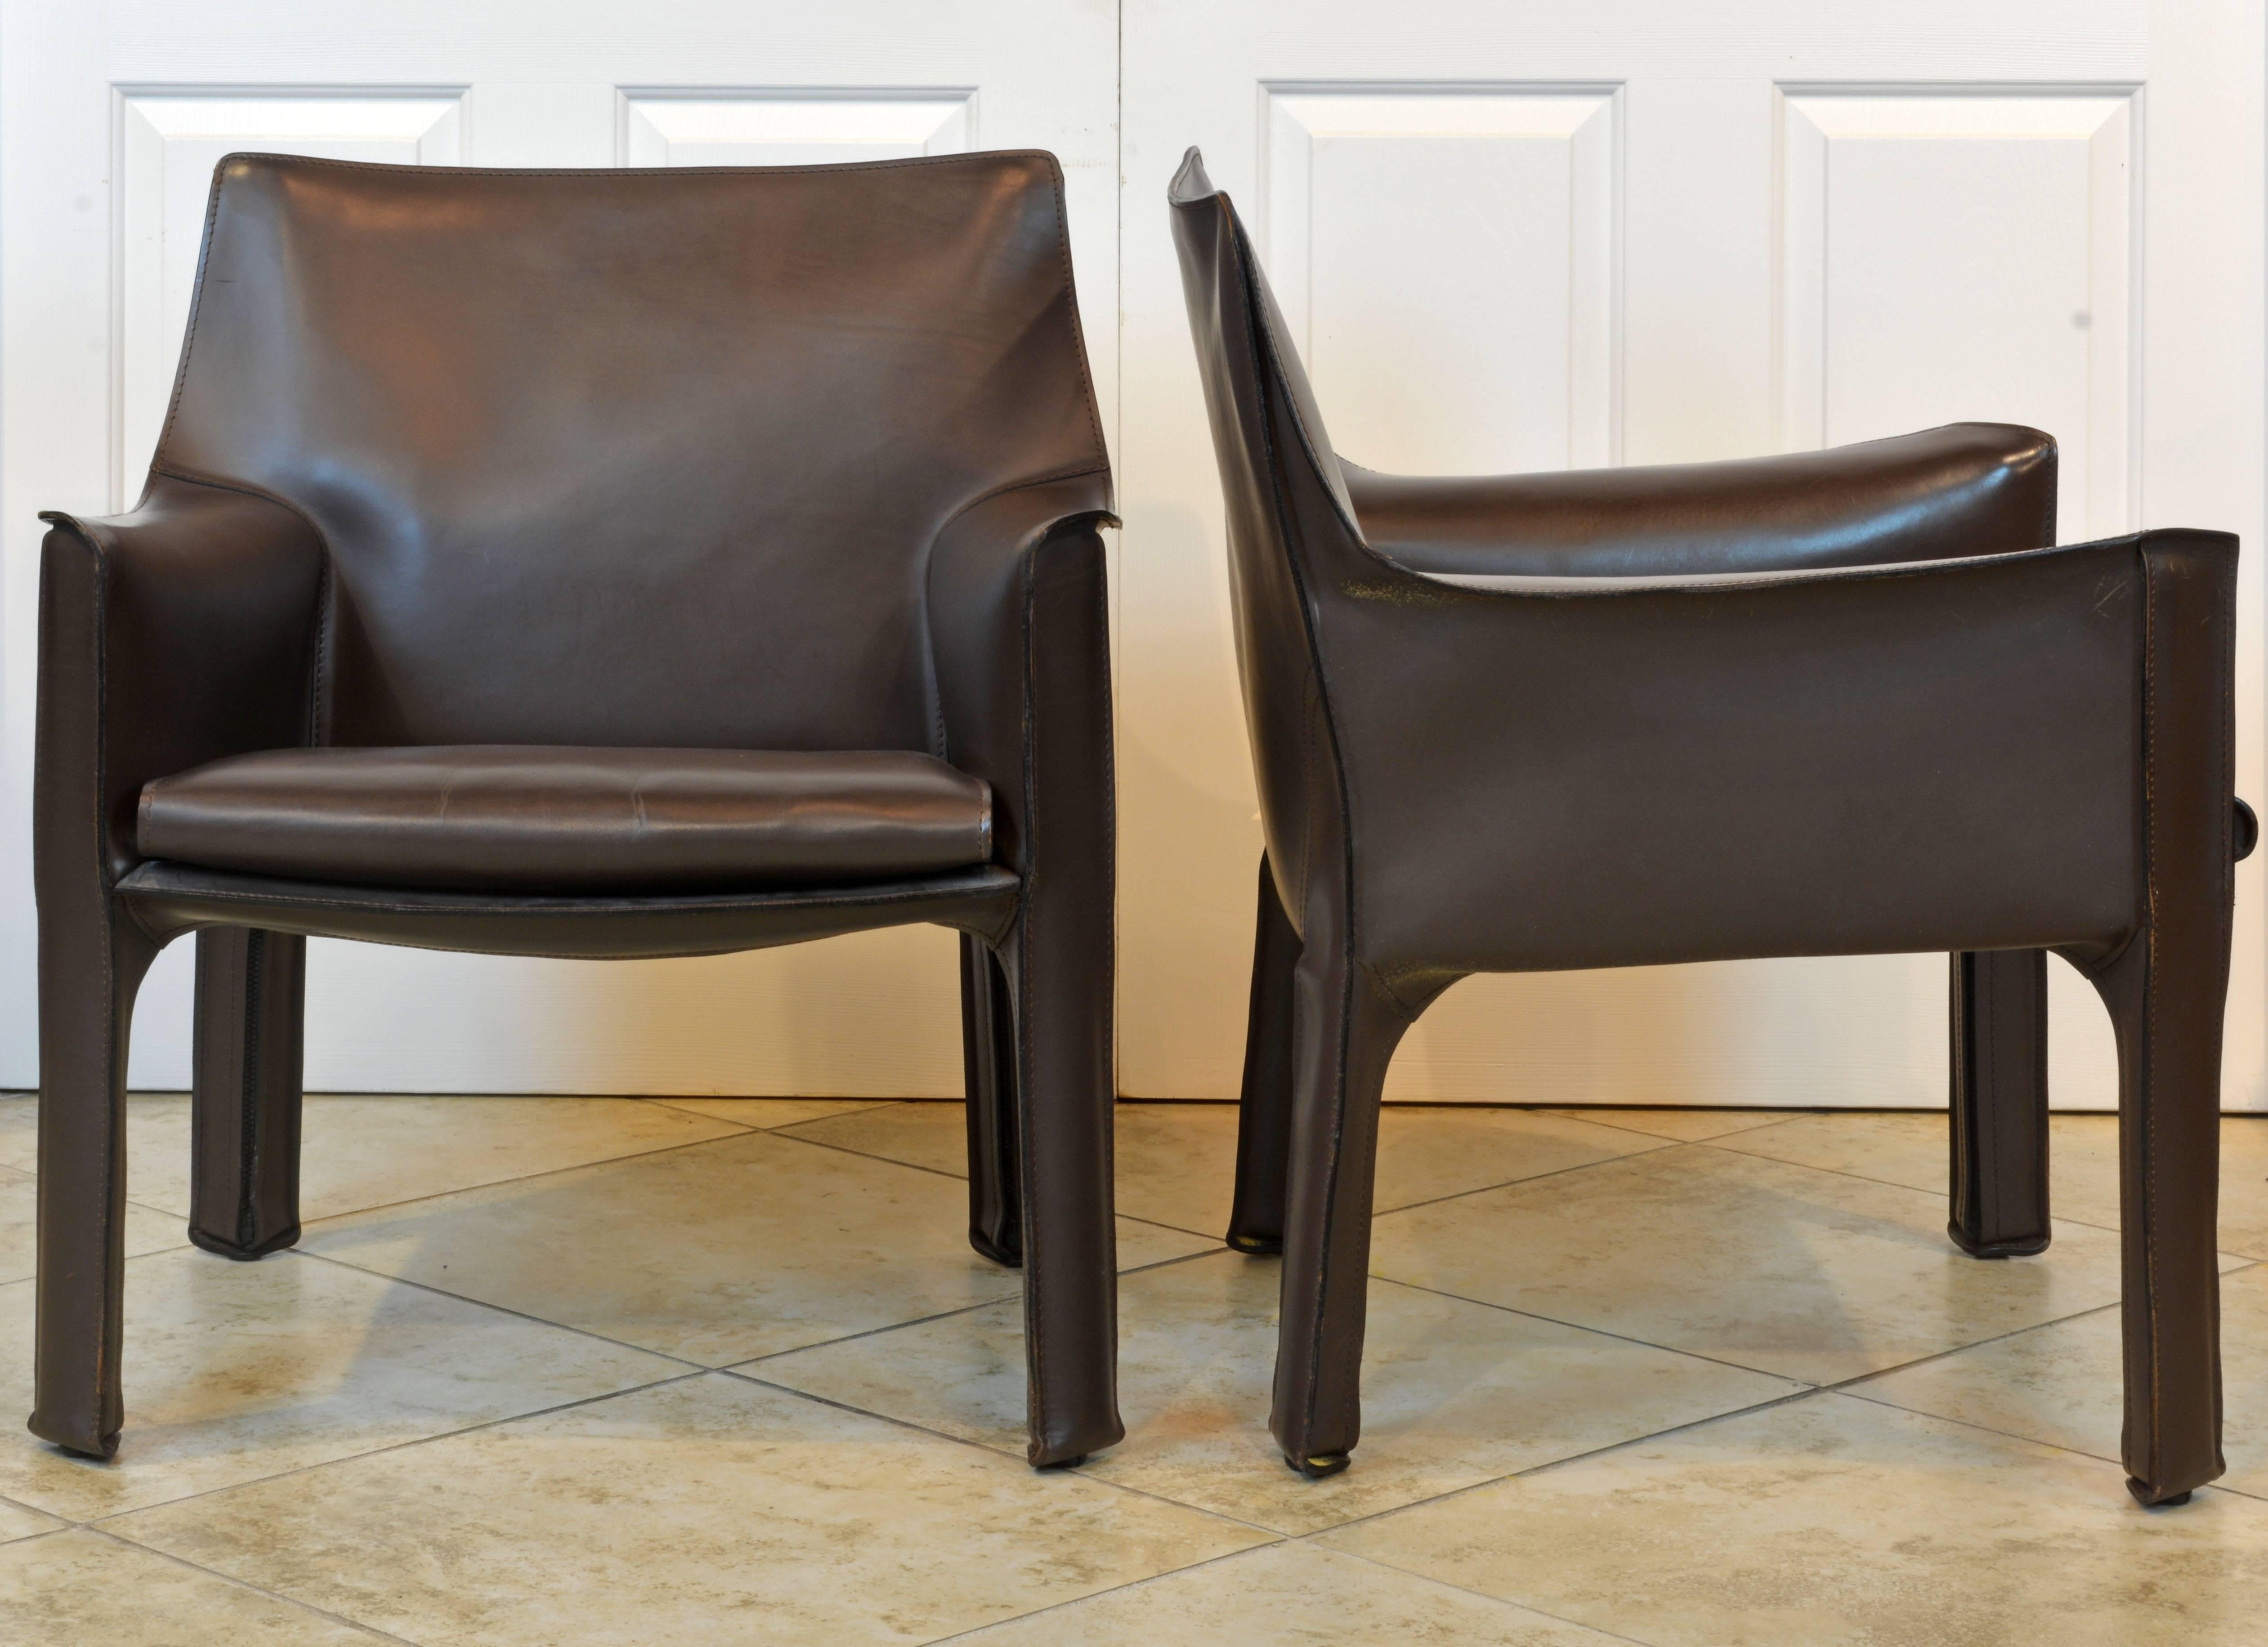 Modern Pair of Mario Bellini Design Leather Cab Lounge Chairs by Cassina, Italy